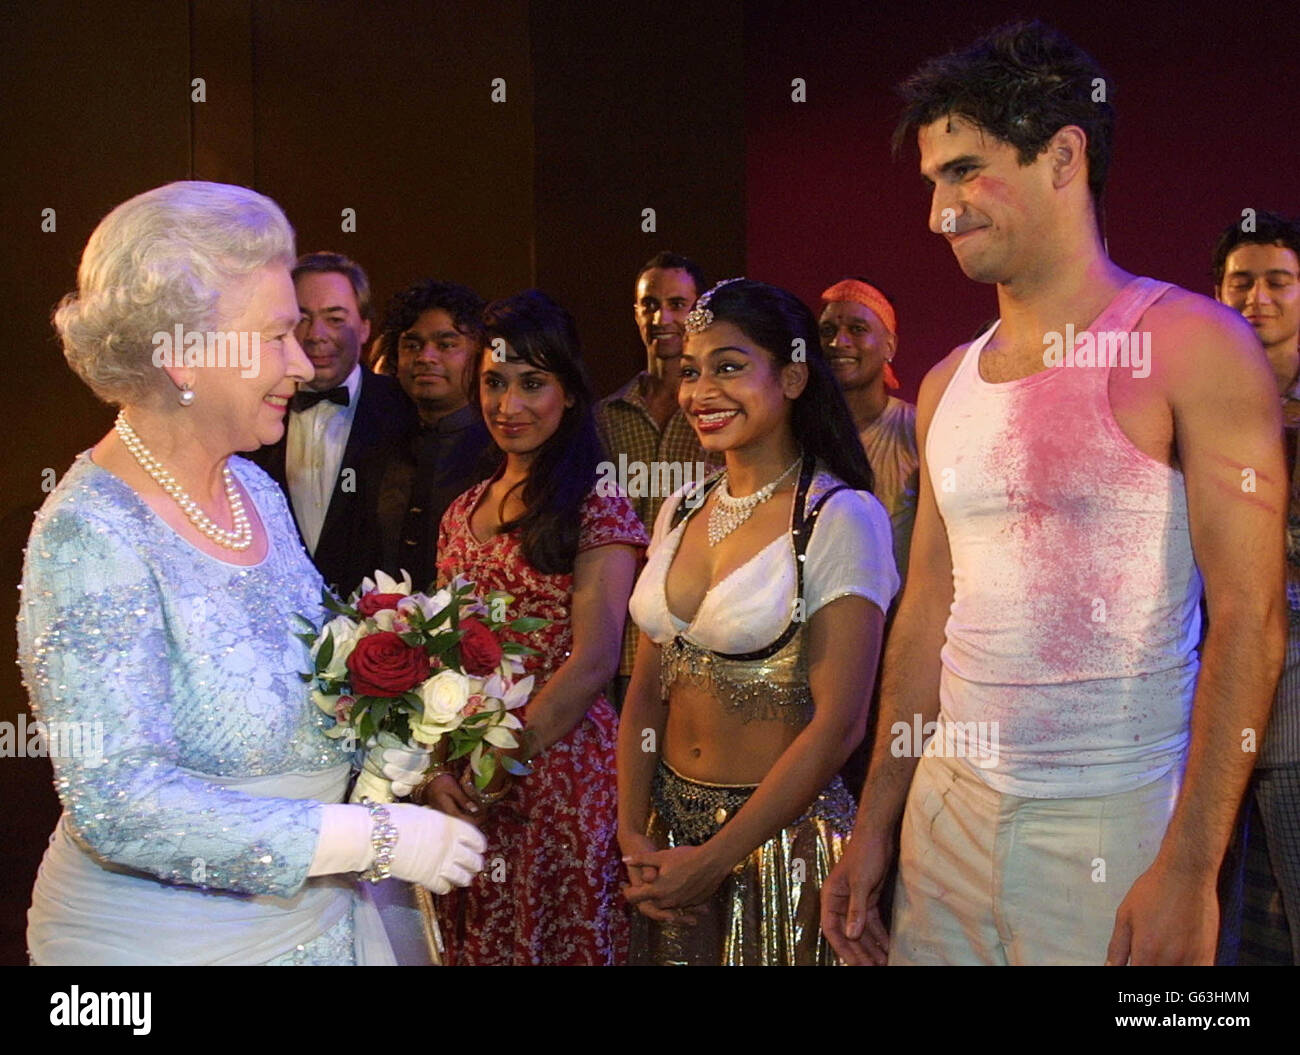 Queen Elizabeth II greets members of the cast at a charity performance of the musical 'Bombay Dreams' in London. The Gala evening is being held on behalf of the Red Cross. * The cast members are from left to right, Preeya Kalidas who plays Priya, Ayesha Dharker-Rani, and Raza Jaffrey -Akaash. Stock Photo